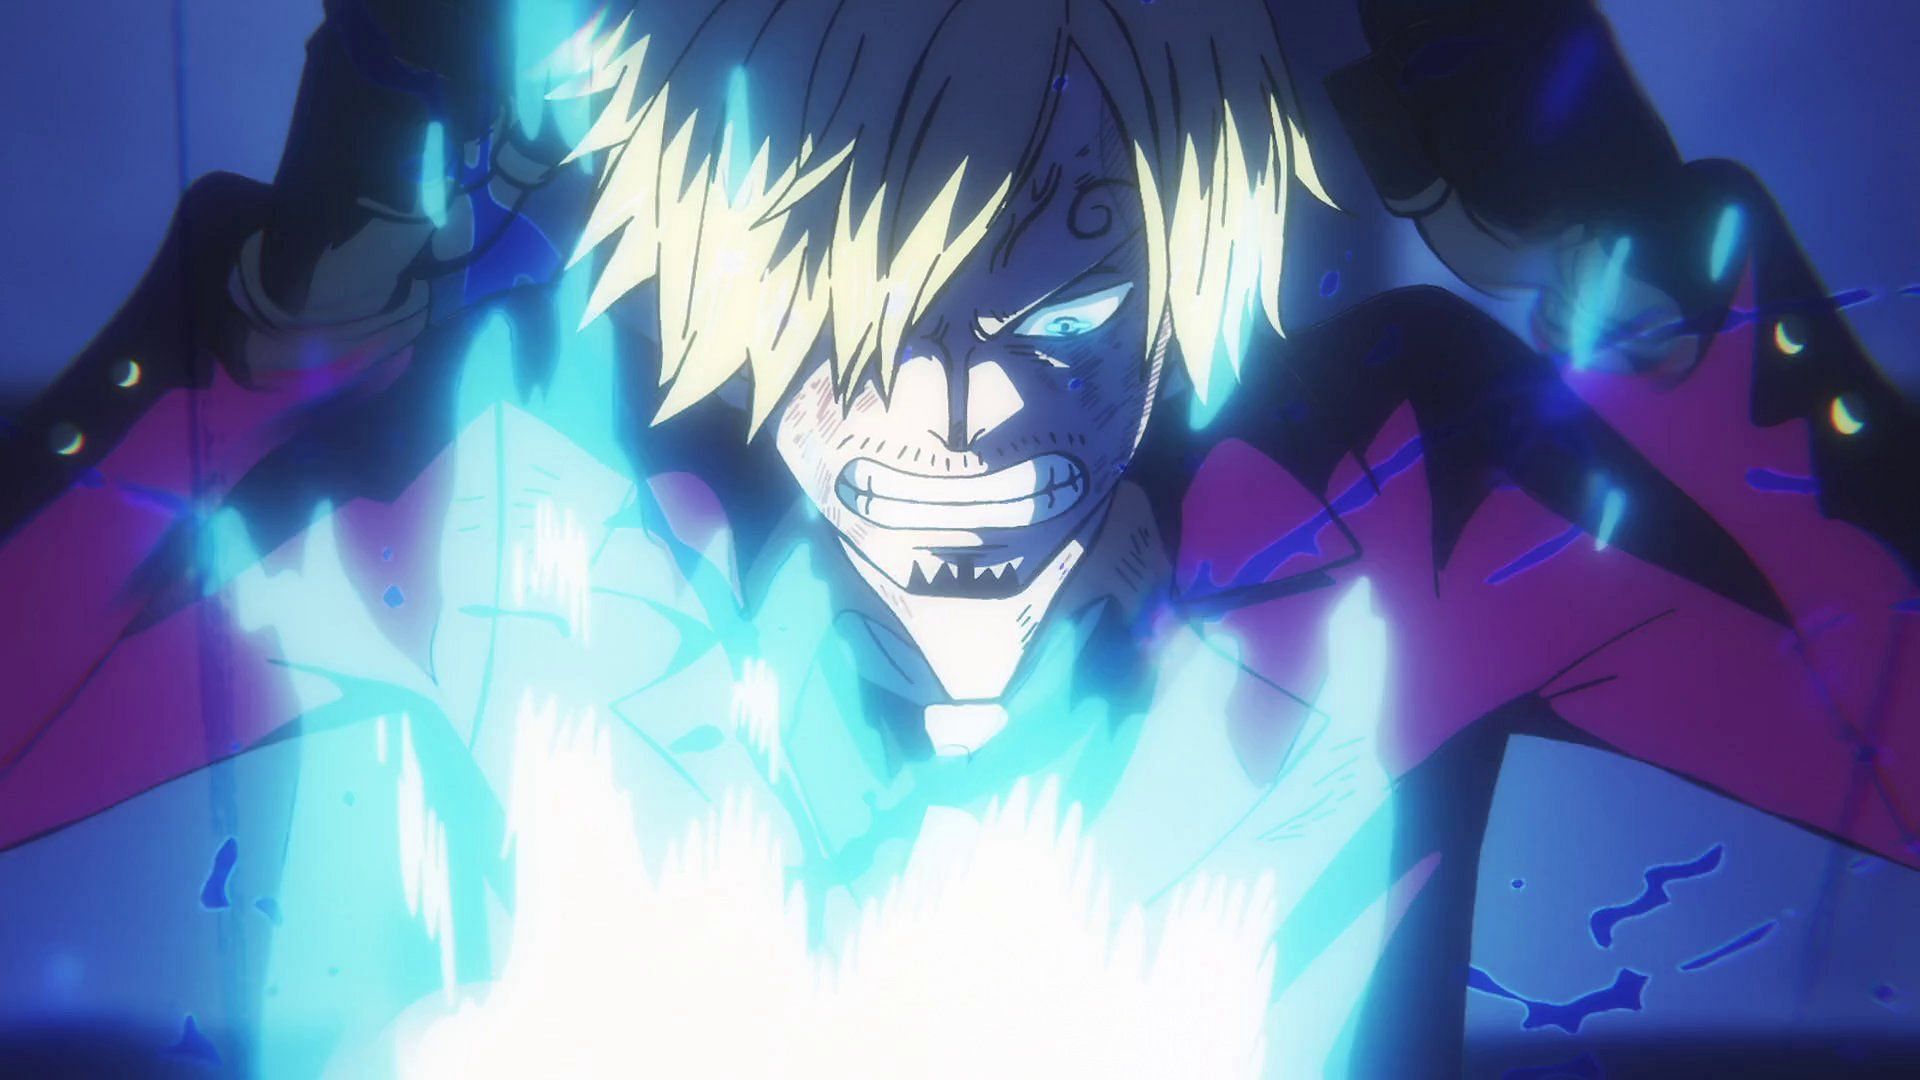 Sanji performing Ifrit Jambe as seen in the One Piece anime (Image via Toei Animation, One Piece)